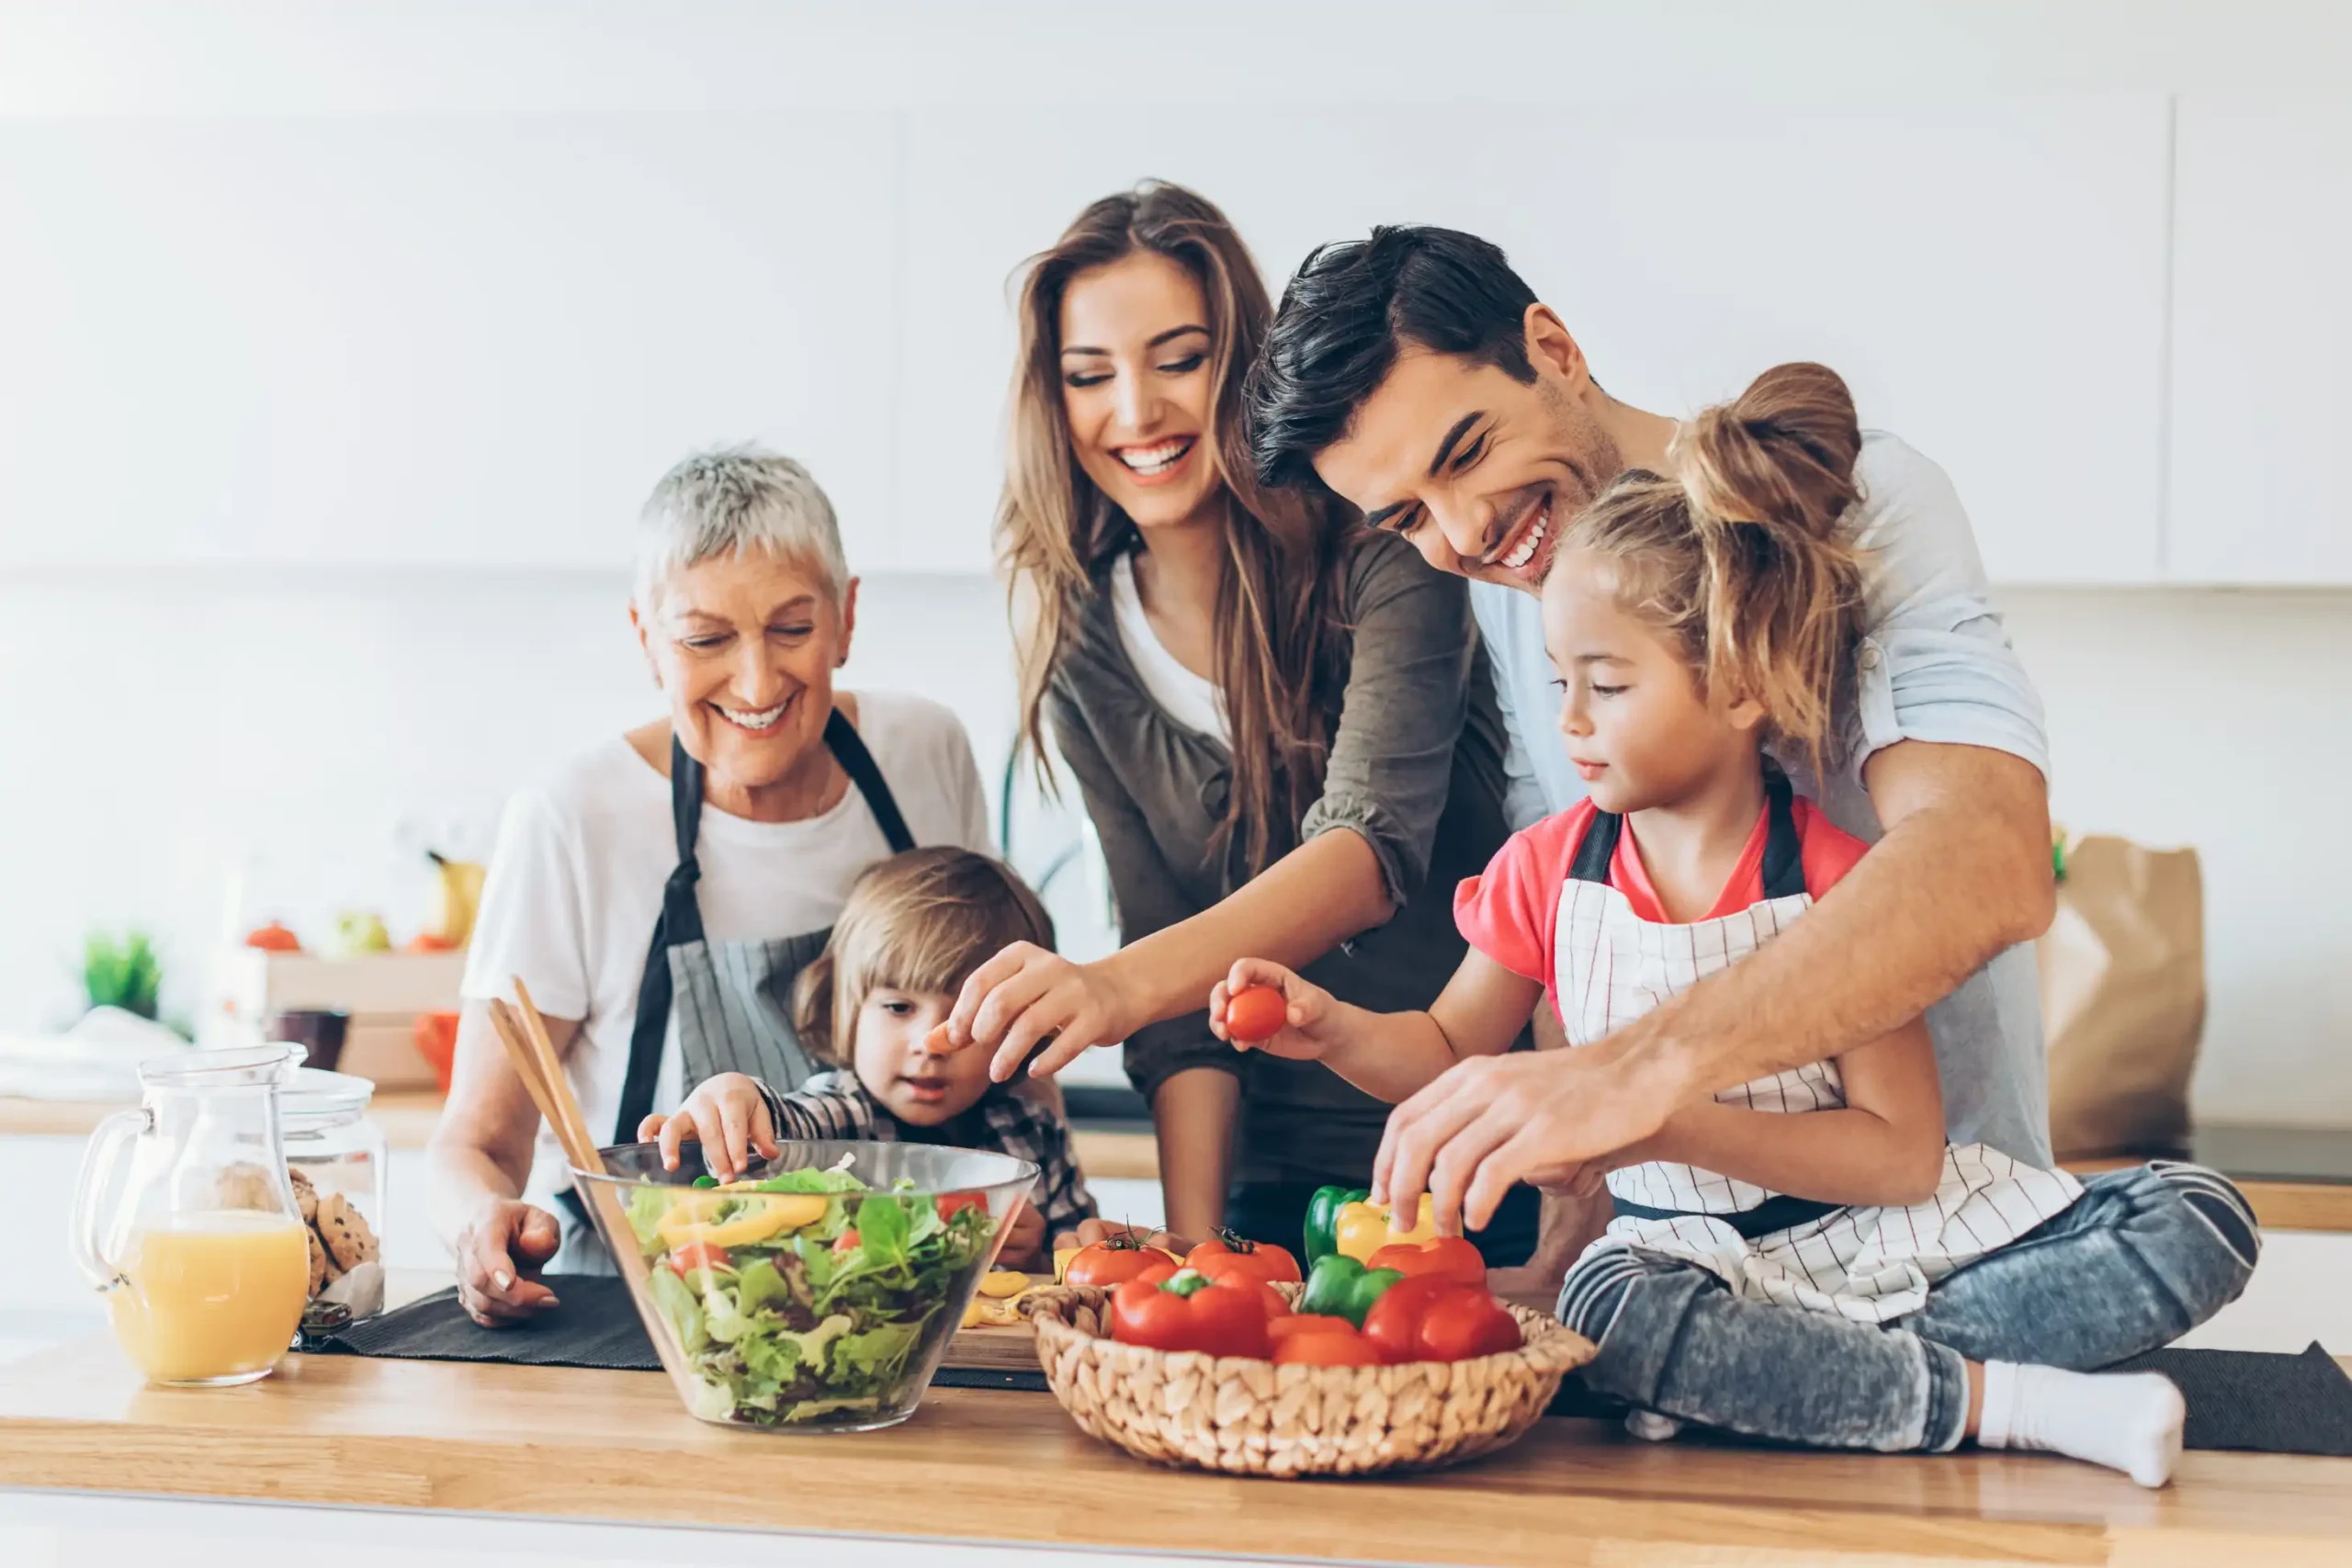 photo of a family preparing healthy food